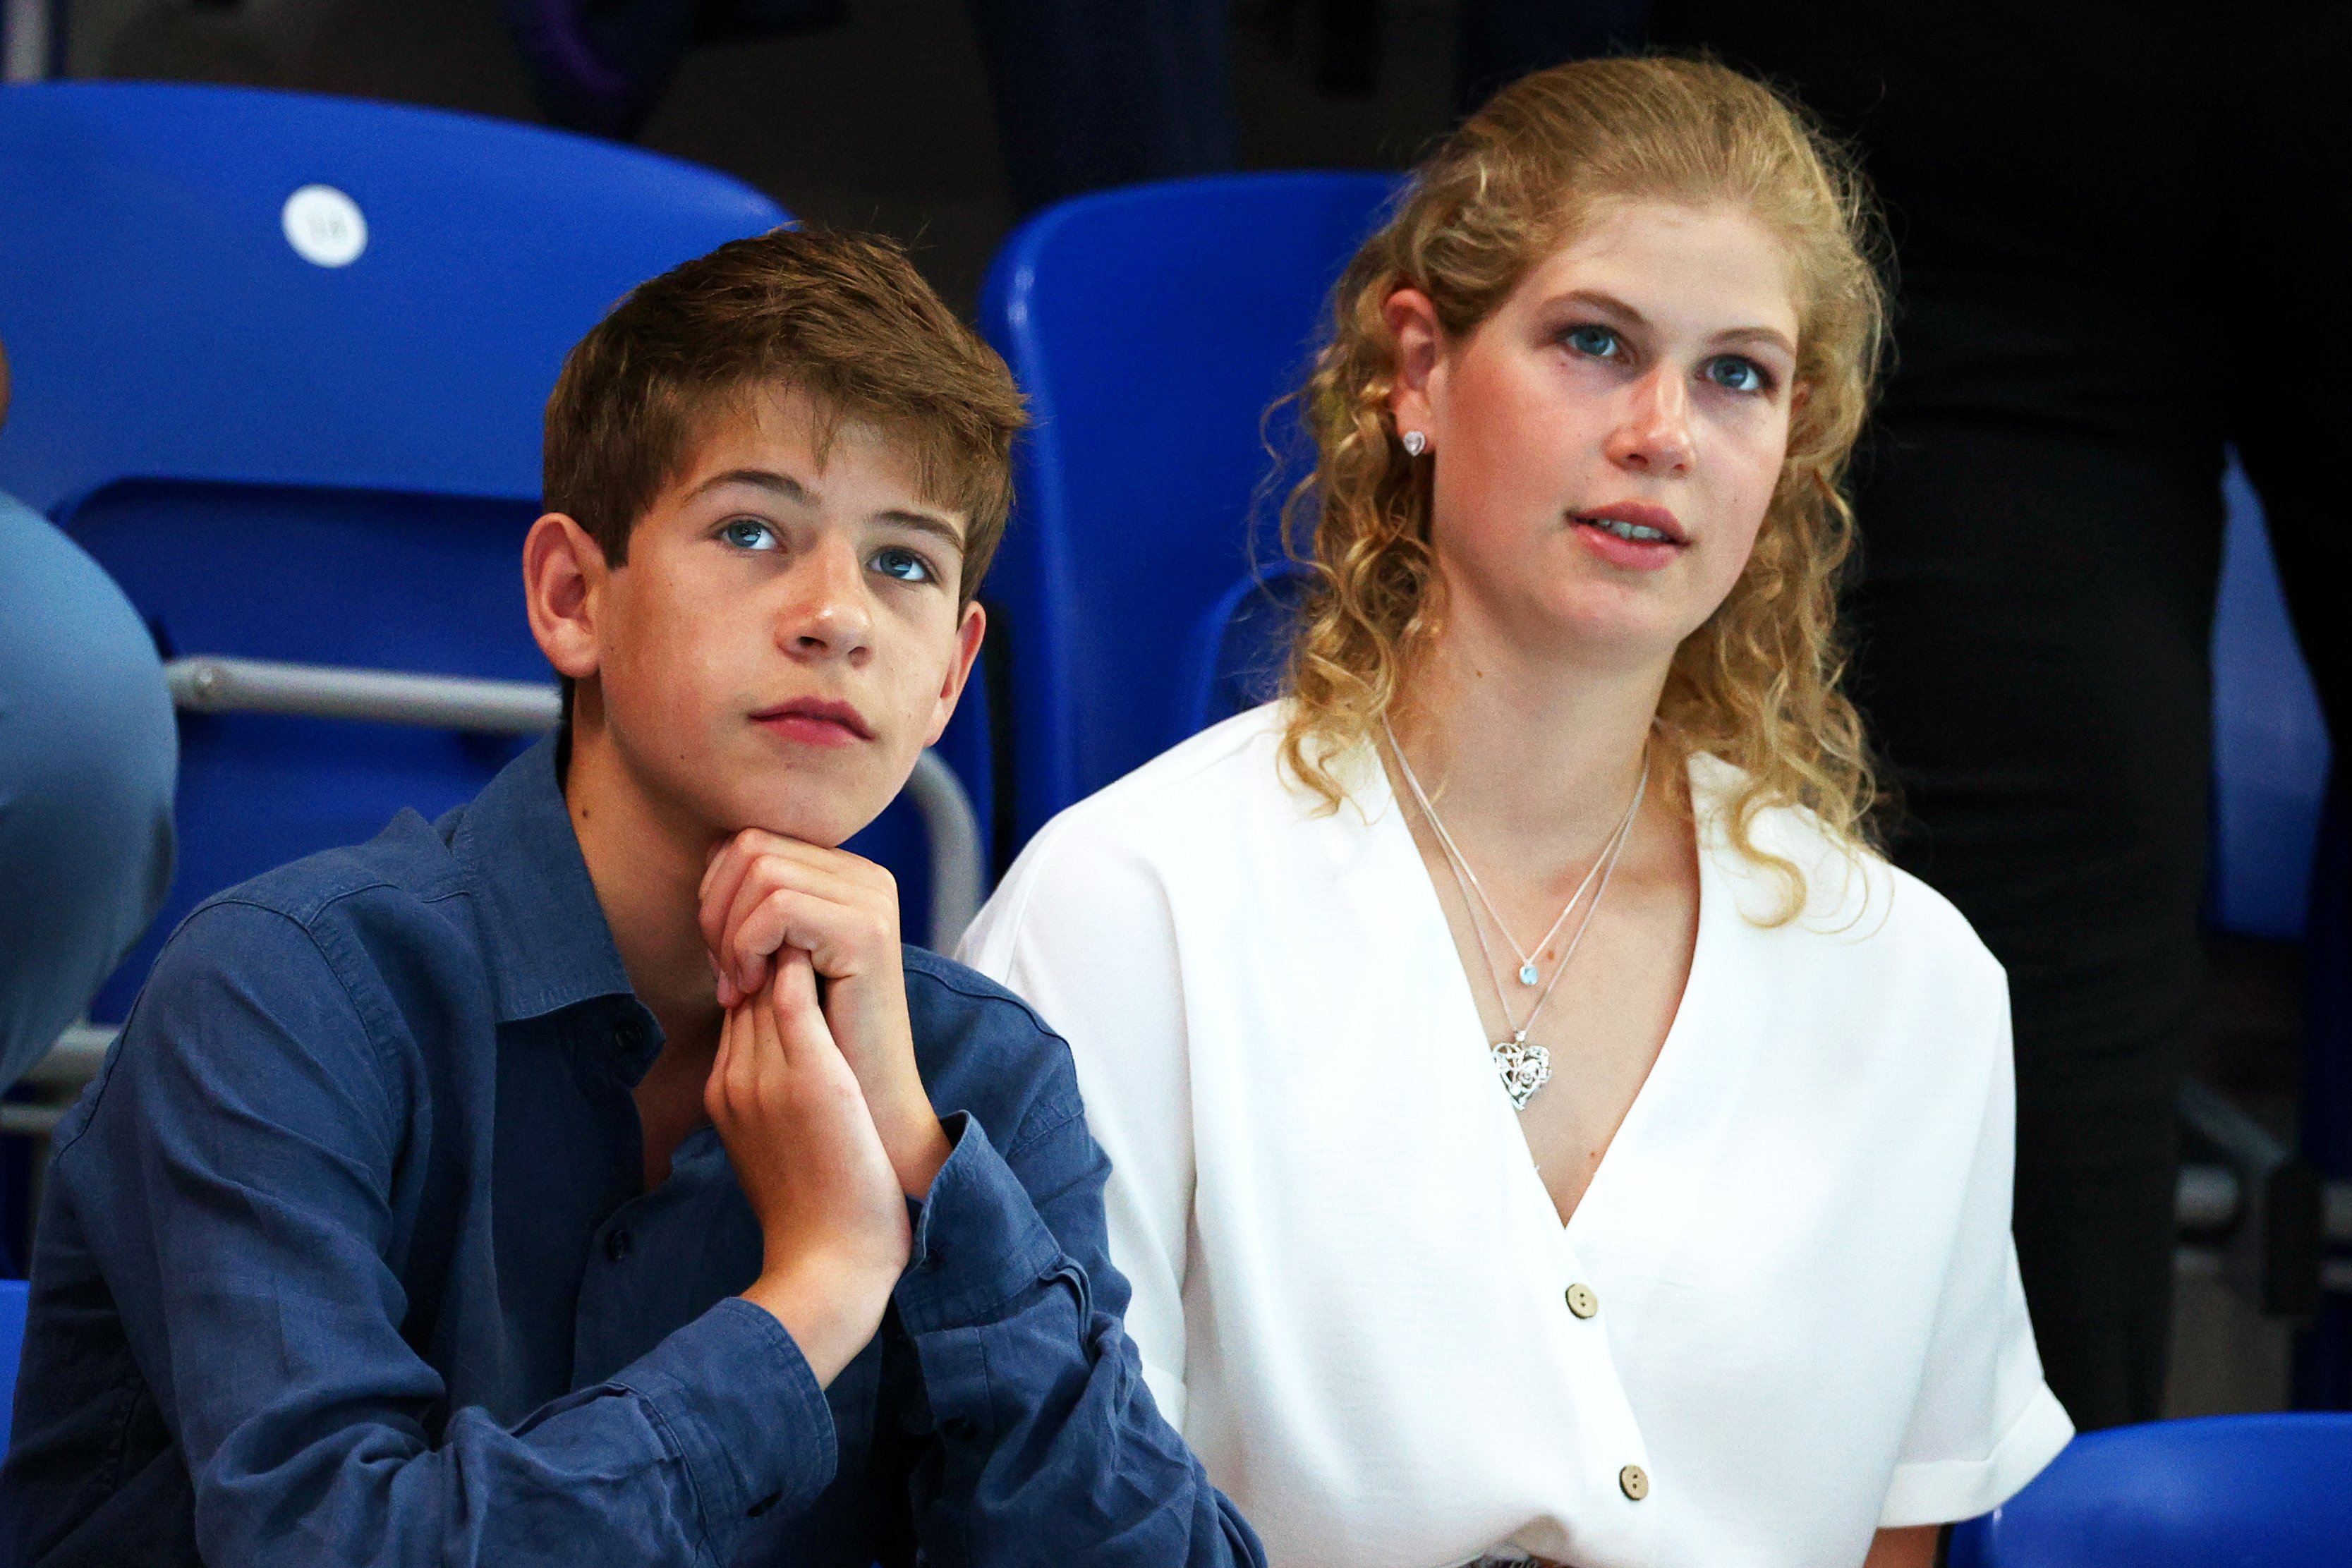 James, Viscount Severn, and Lady Louise Windsor at Sandwell Aquatics Centre on August 02, 2022, in Smethwick, England | Source: Getty Images